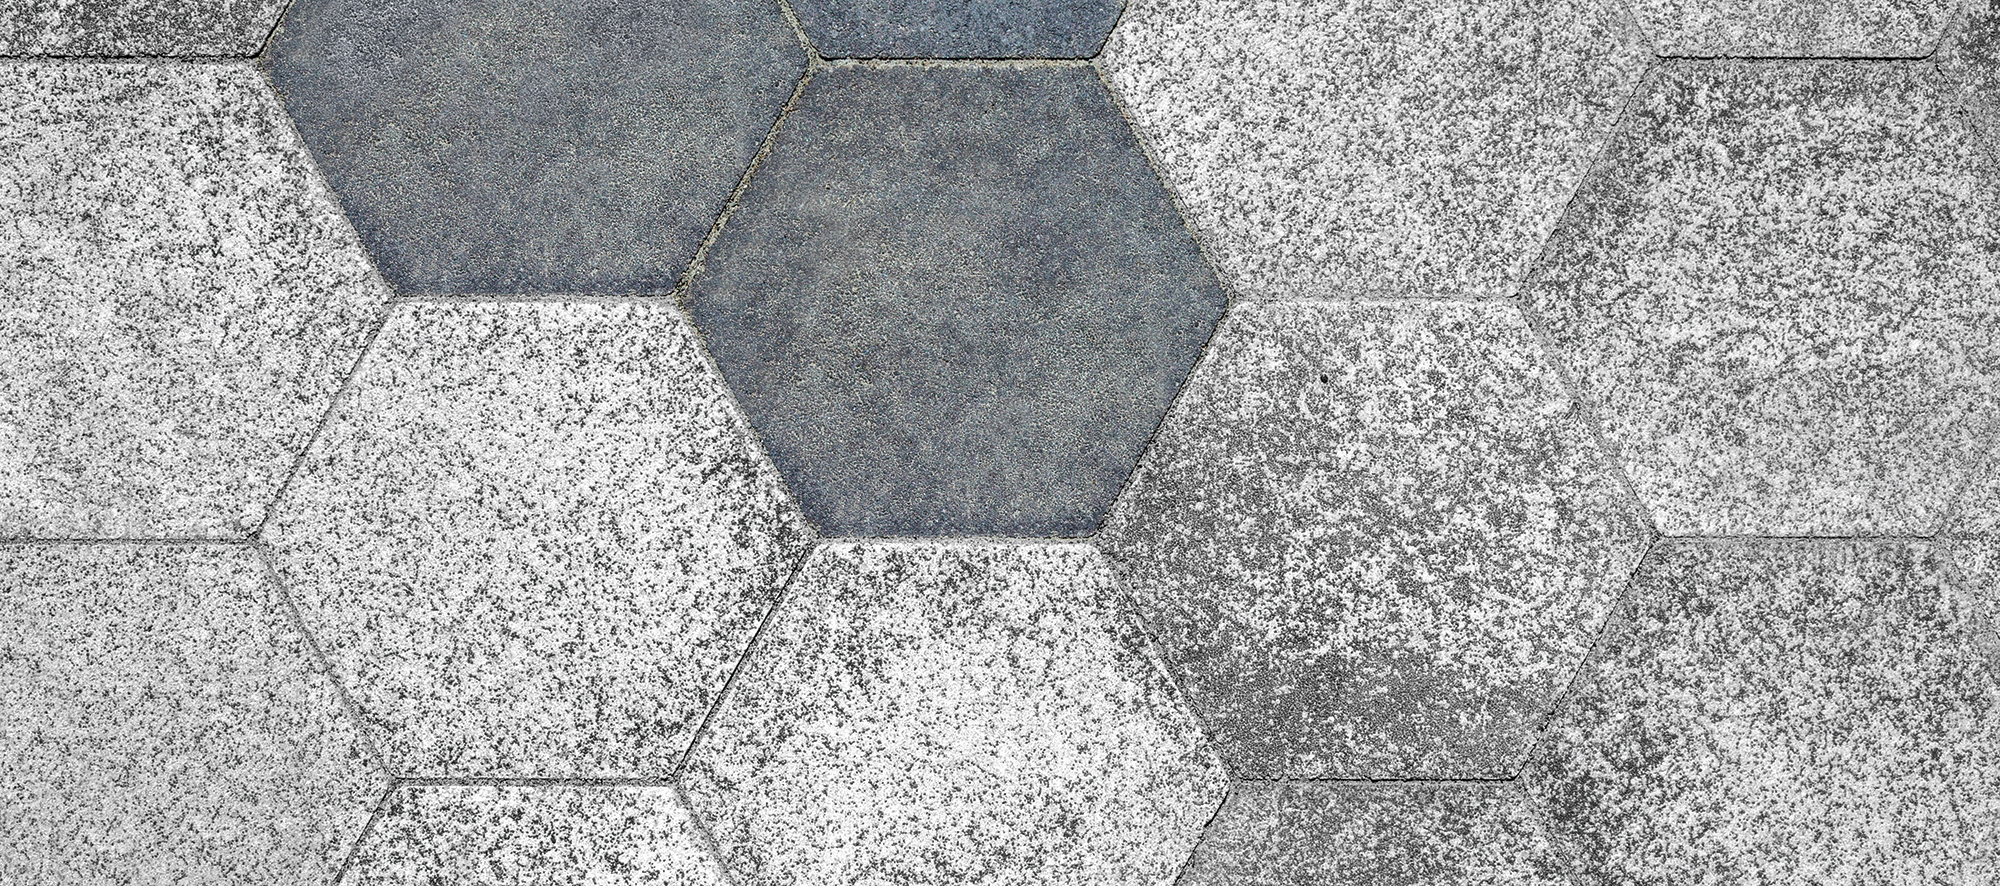 Amherst College campus features a stimulating pixelated design pattern, featuring the hexagonal City Park Paver in two tones.